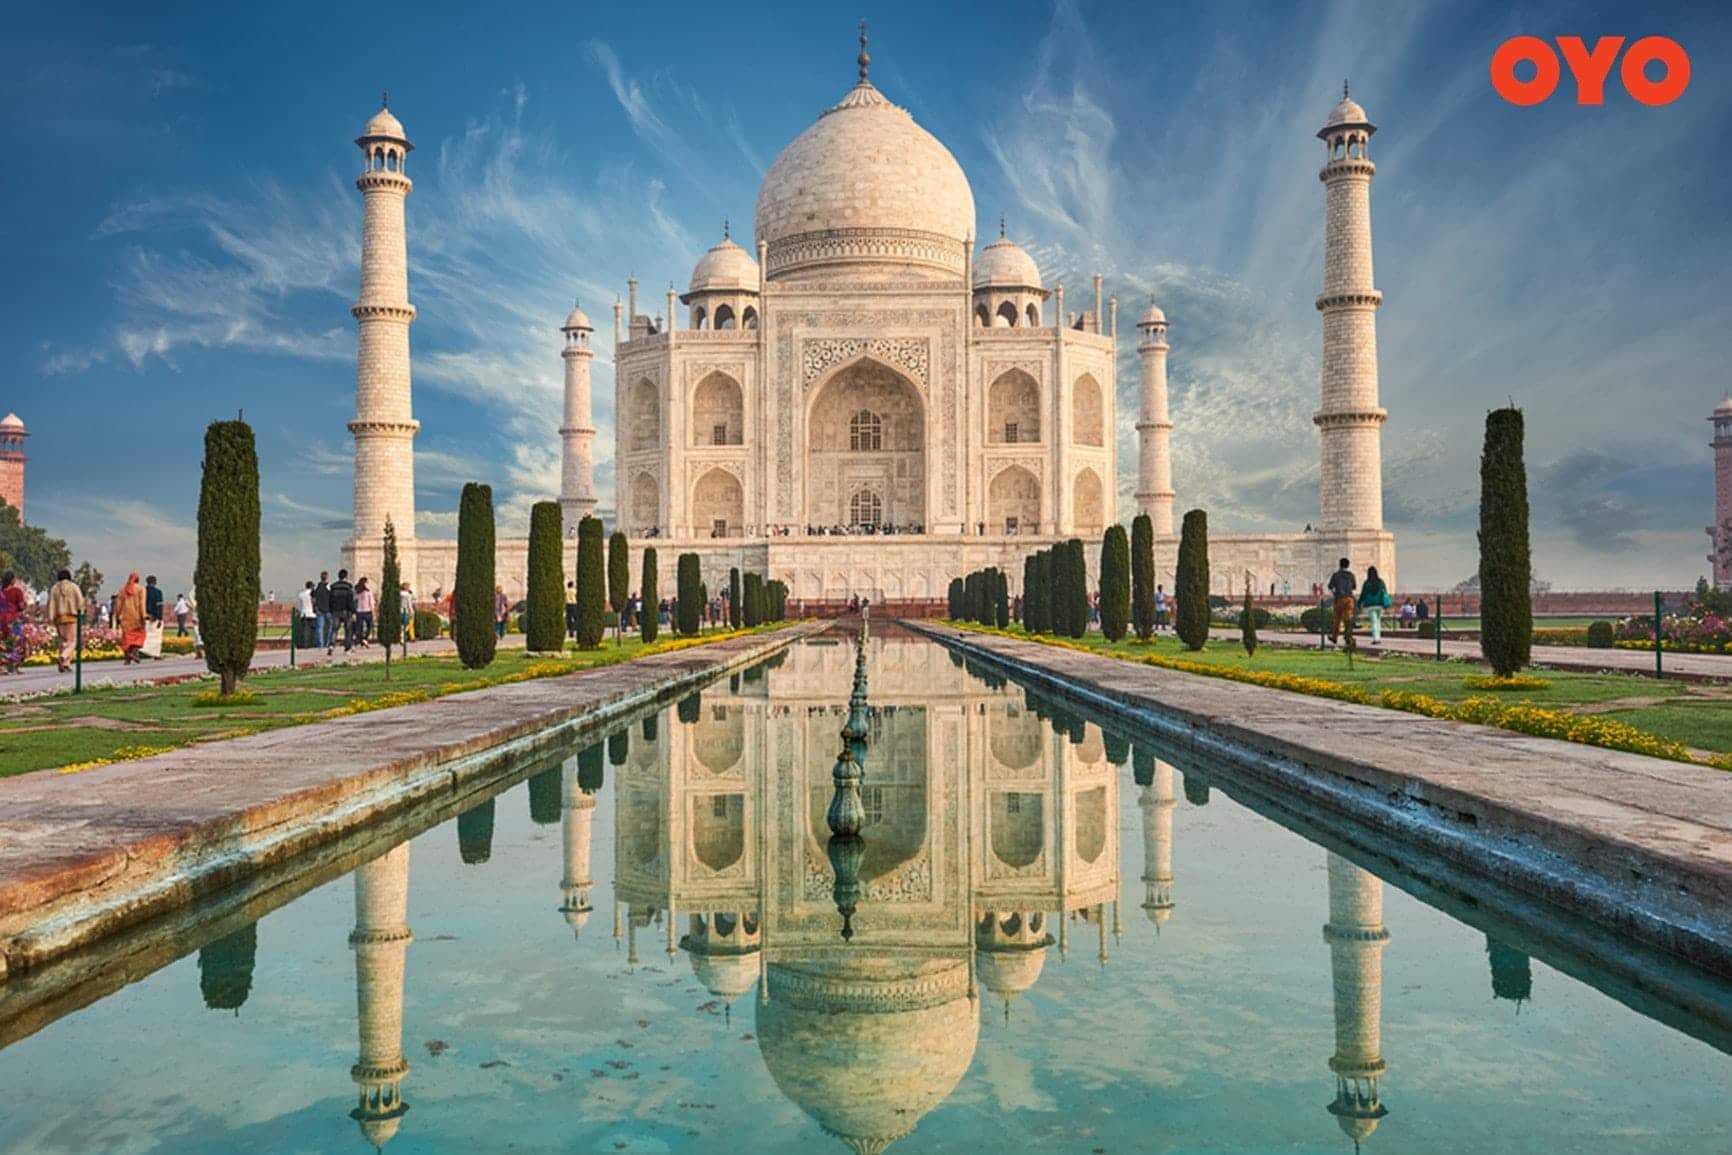 Taj Mahal, Agra - one of the most famous historical places in India